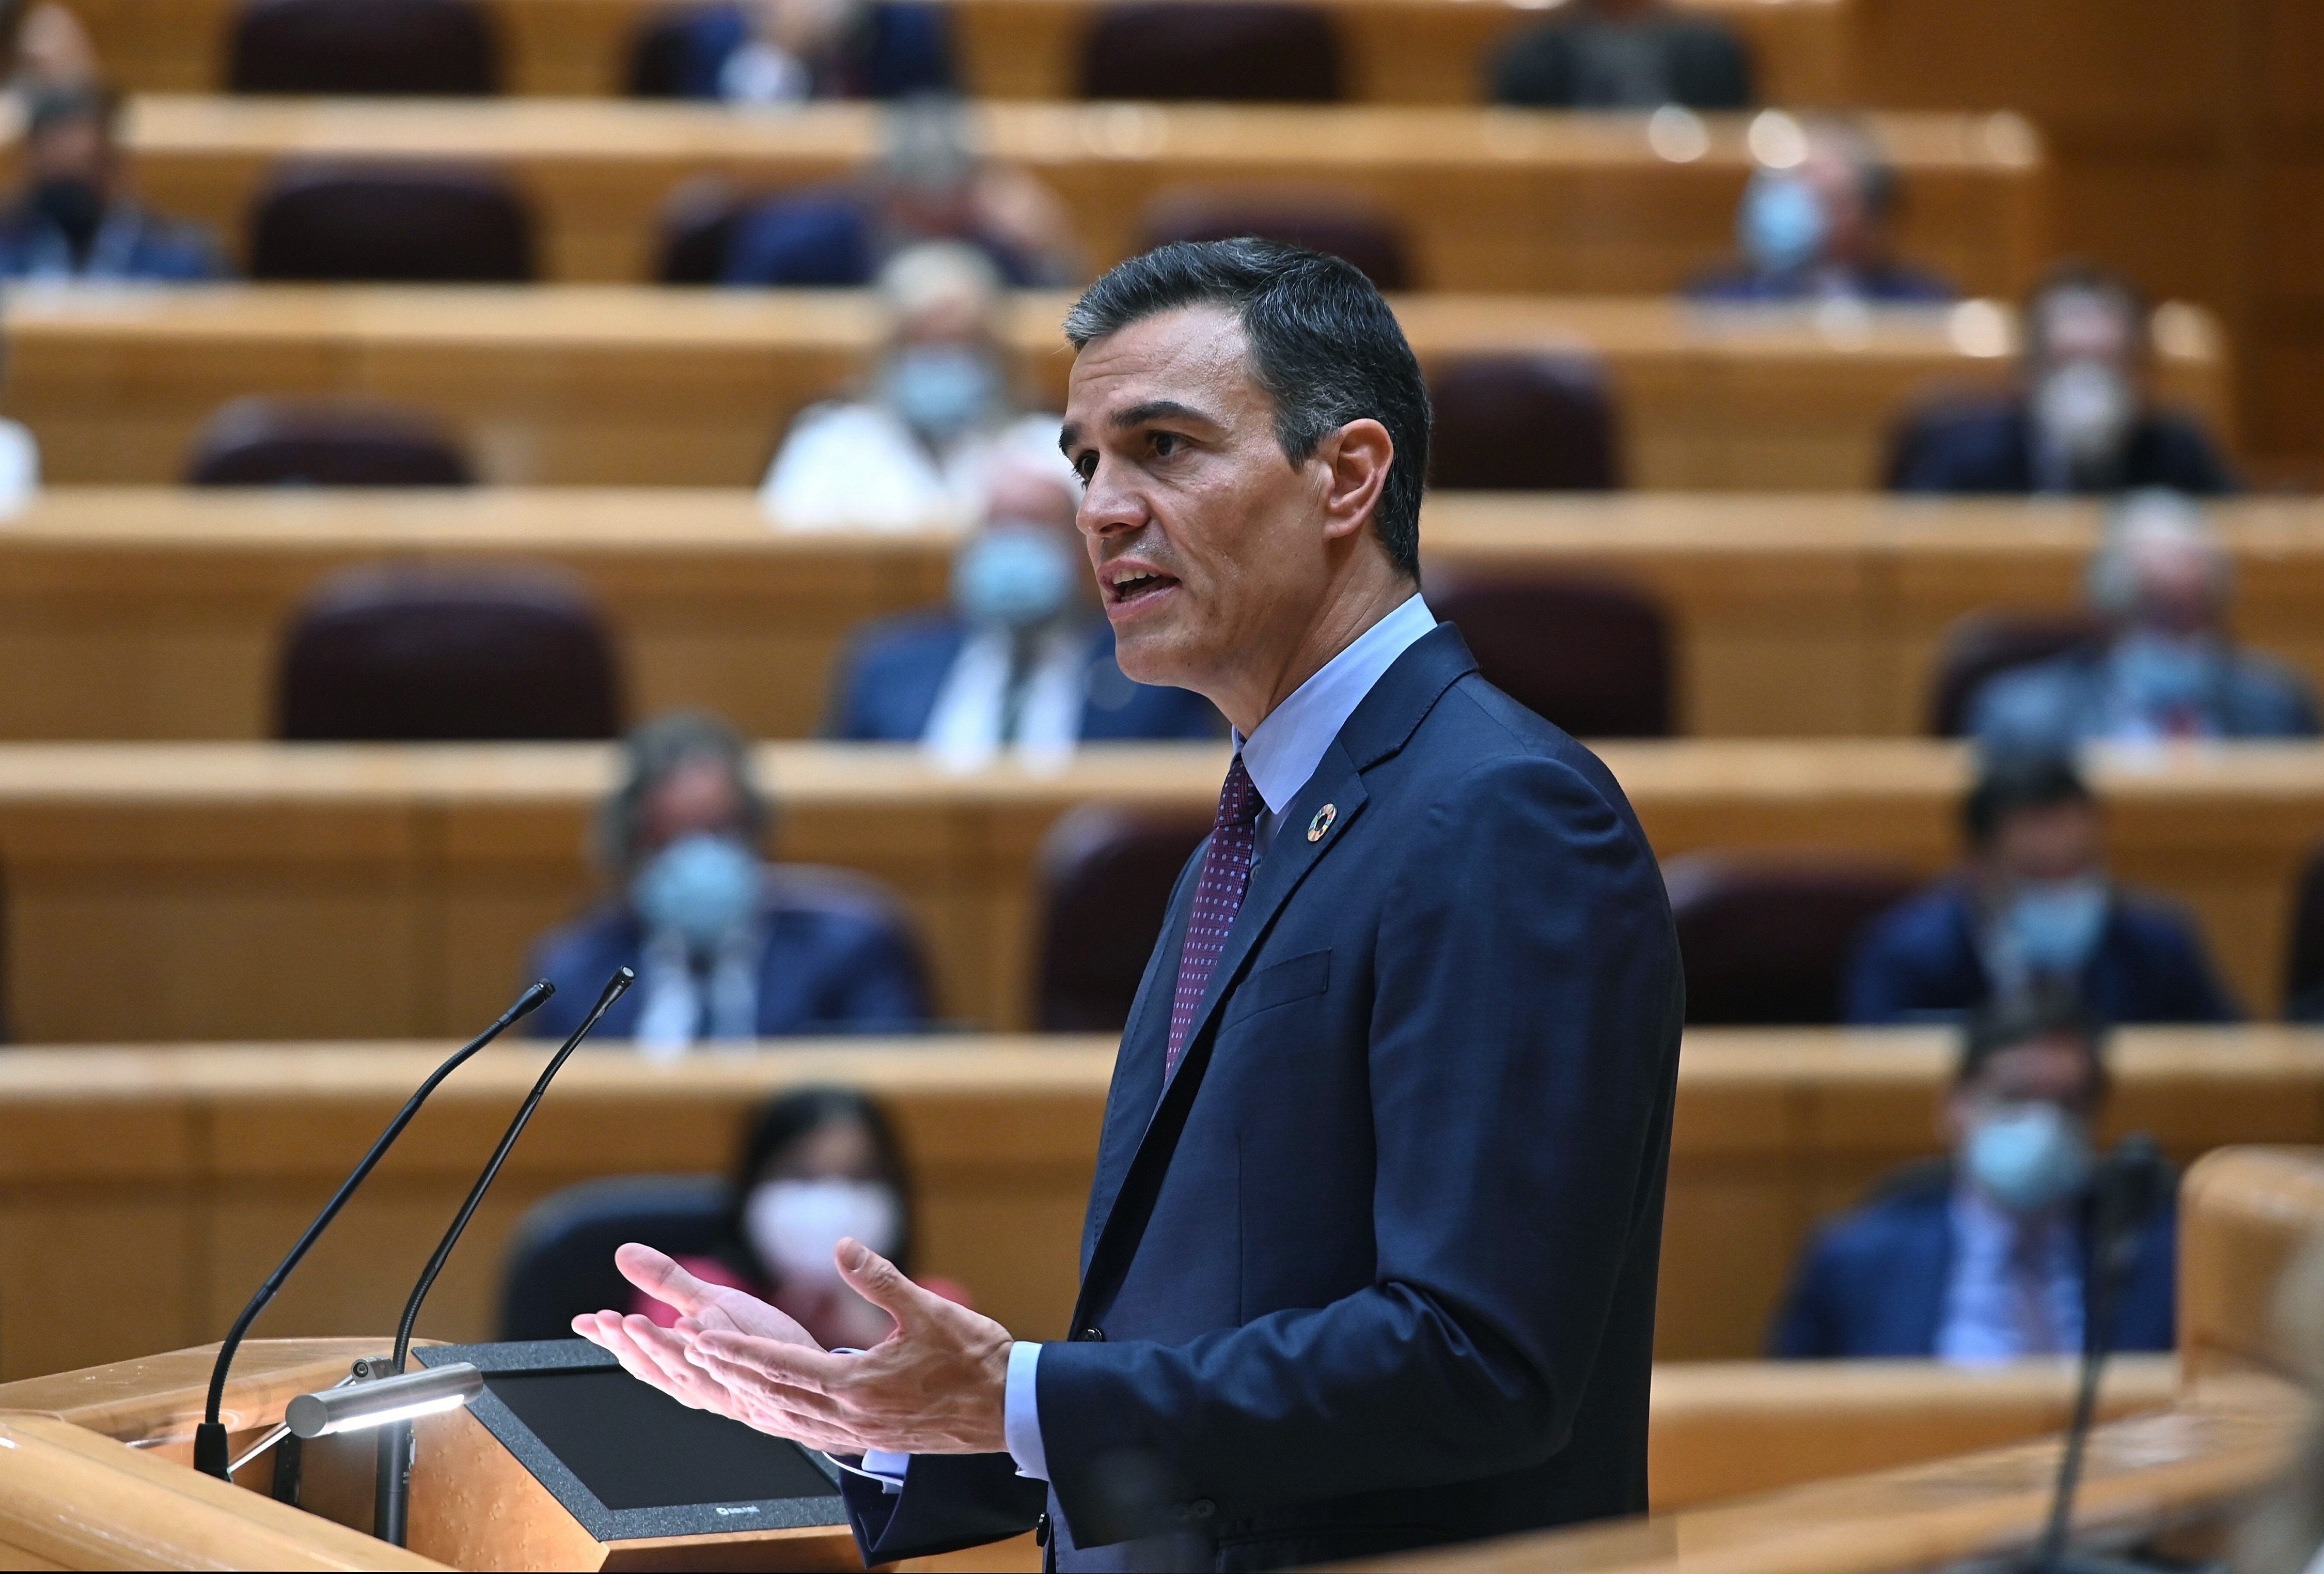 Pedro Sánchez mixes denial with excuses on Spain's underinvestment in Catalonia